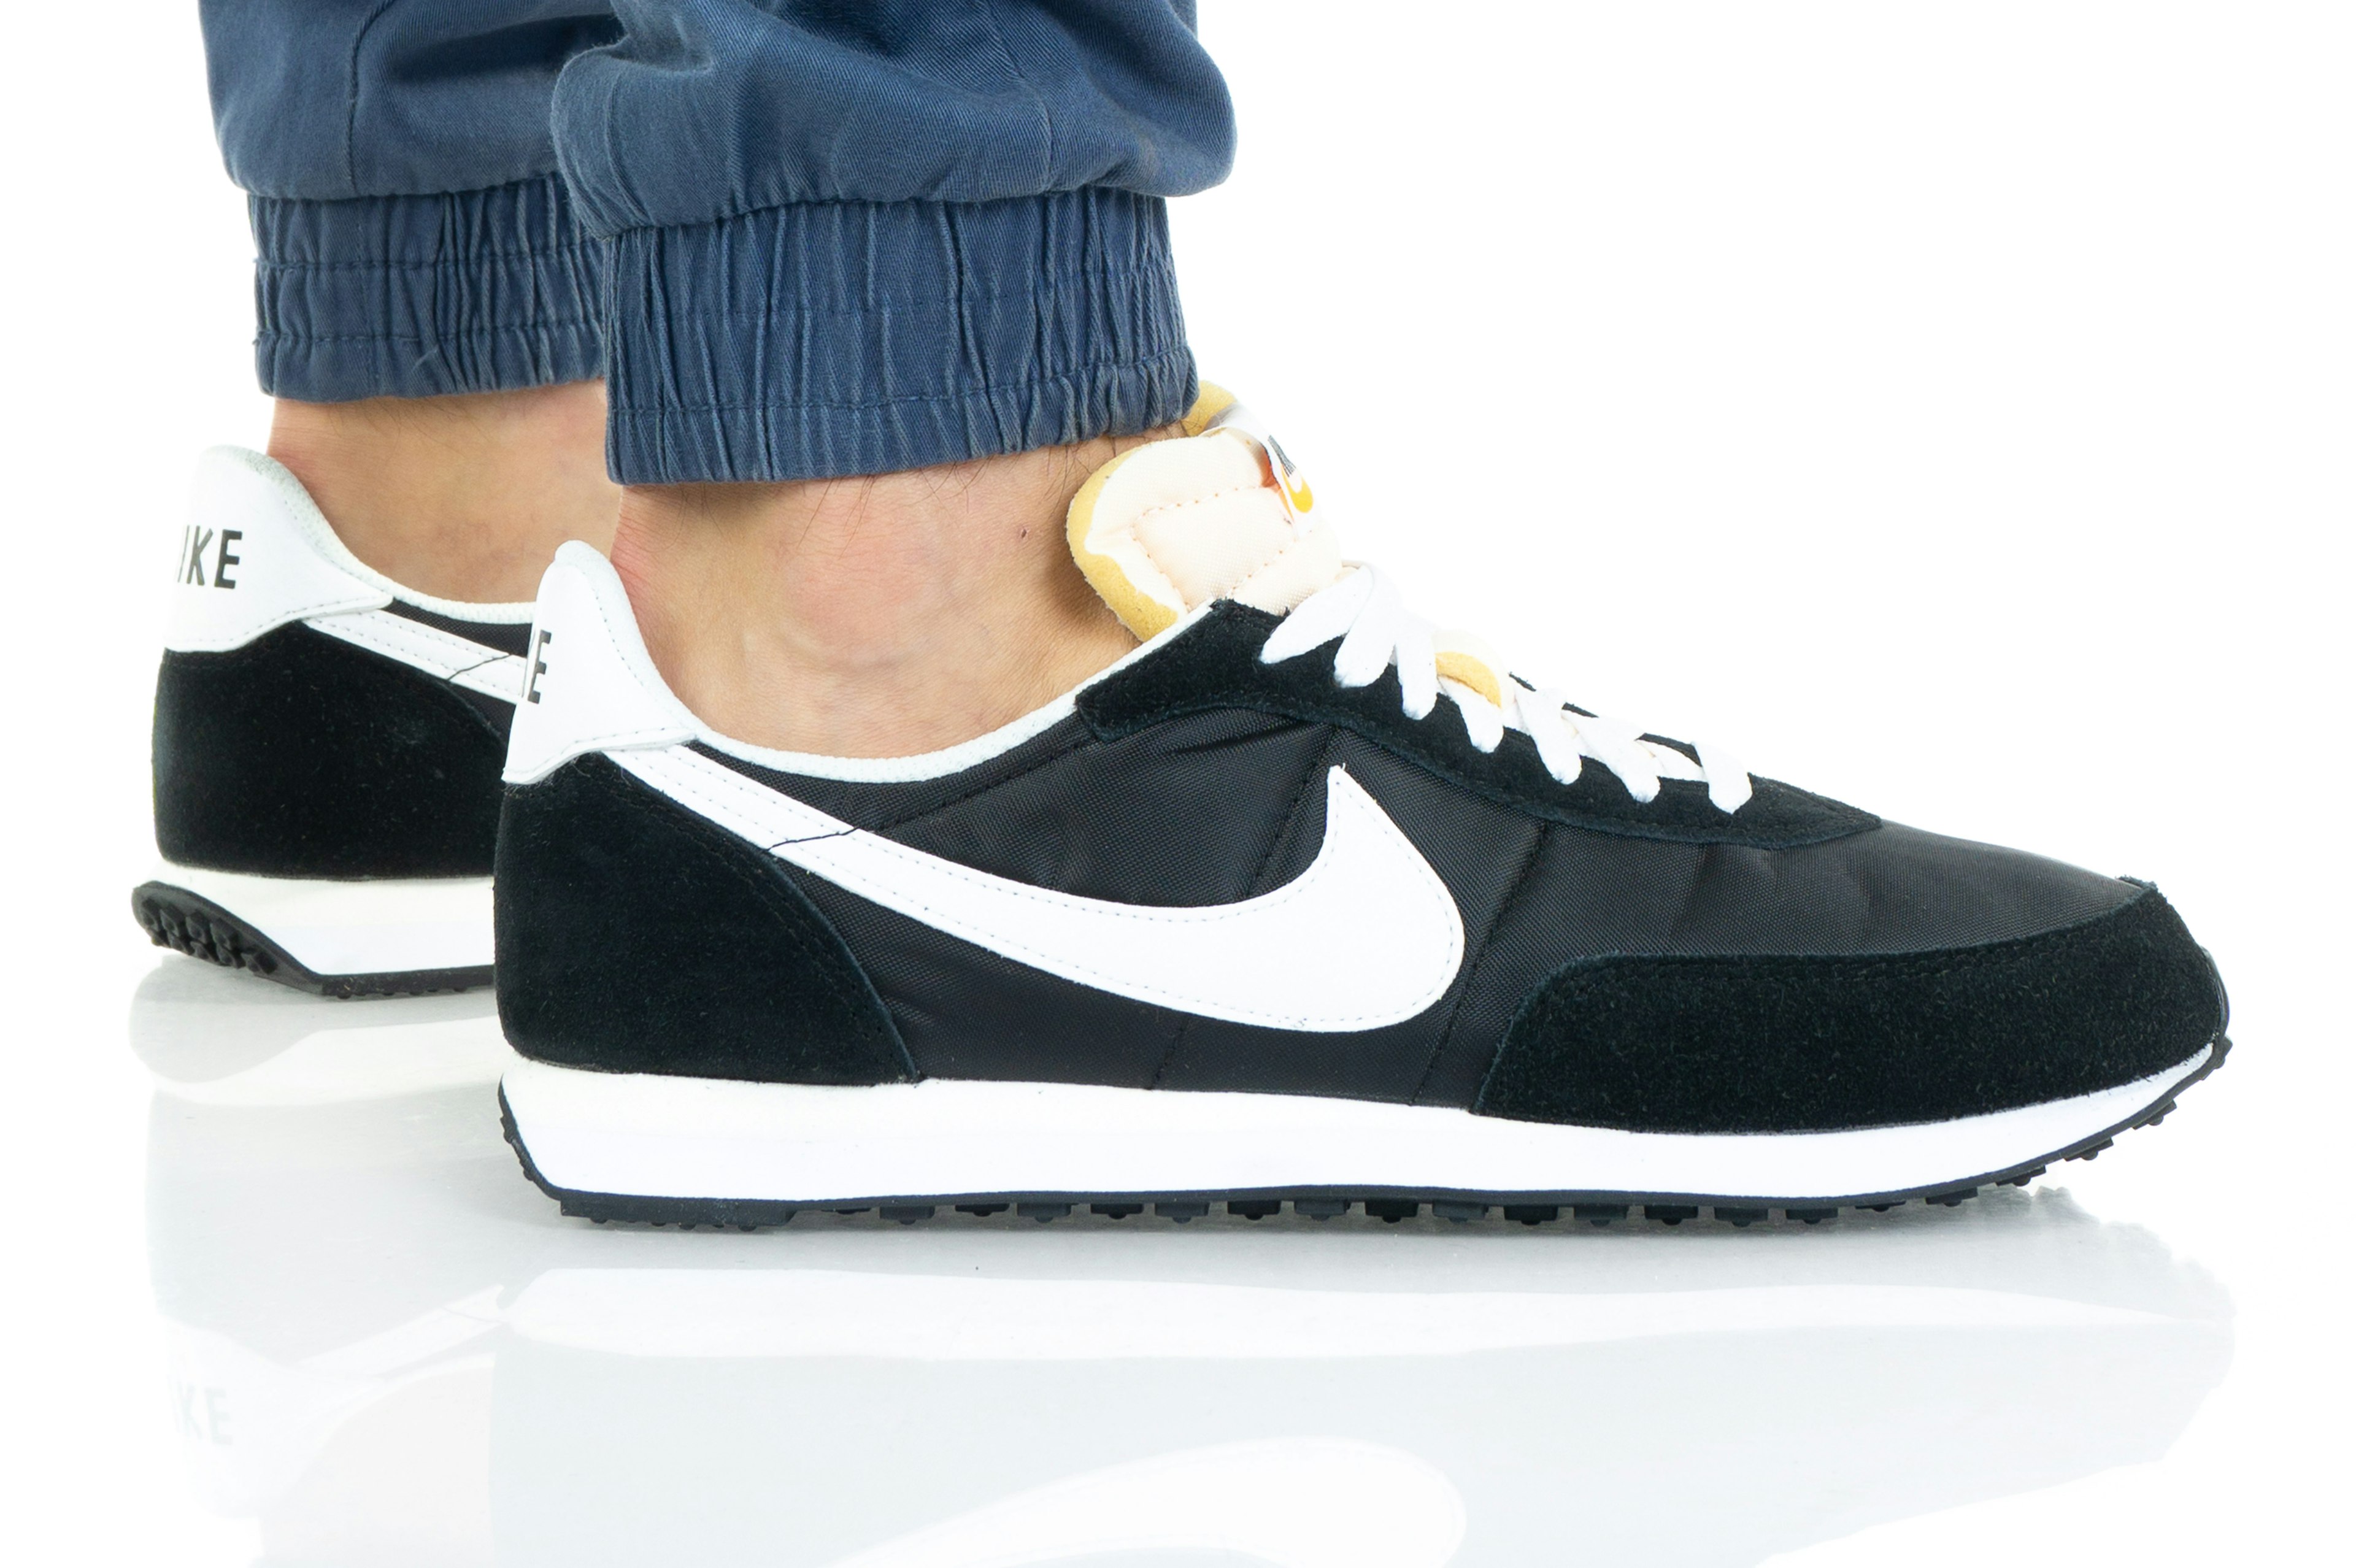 Nike WAFFLE TRAINER 2 DH1349-001